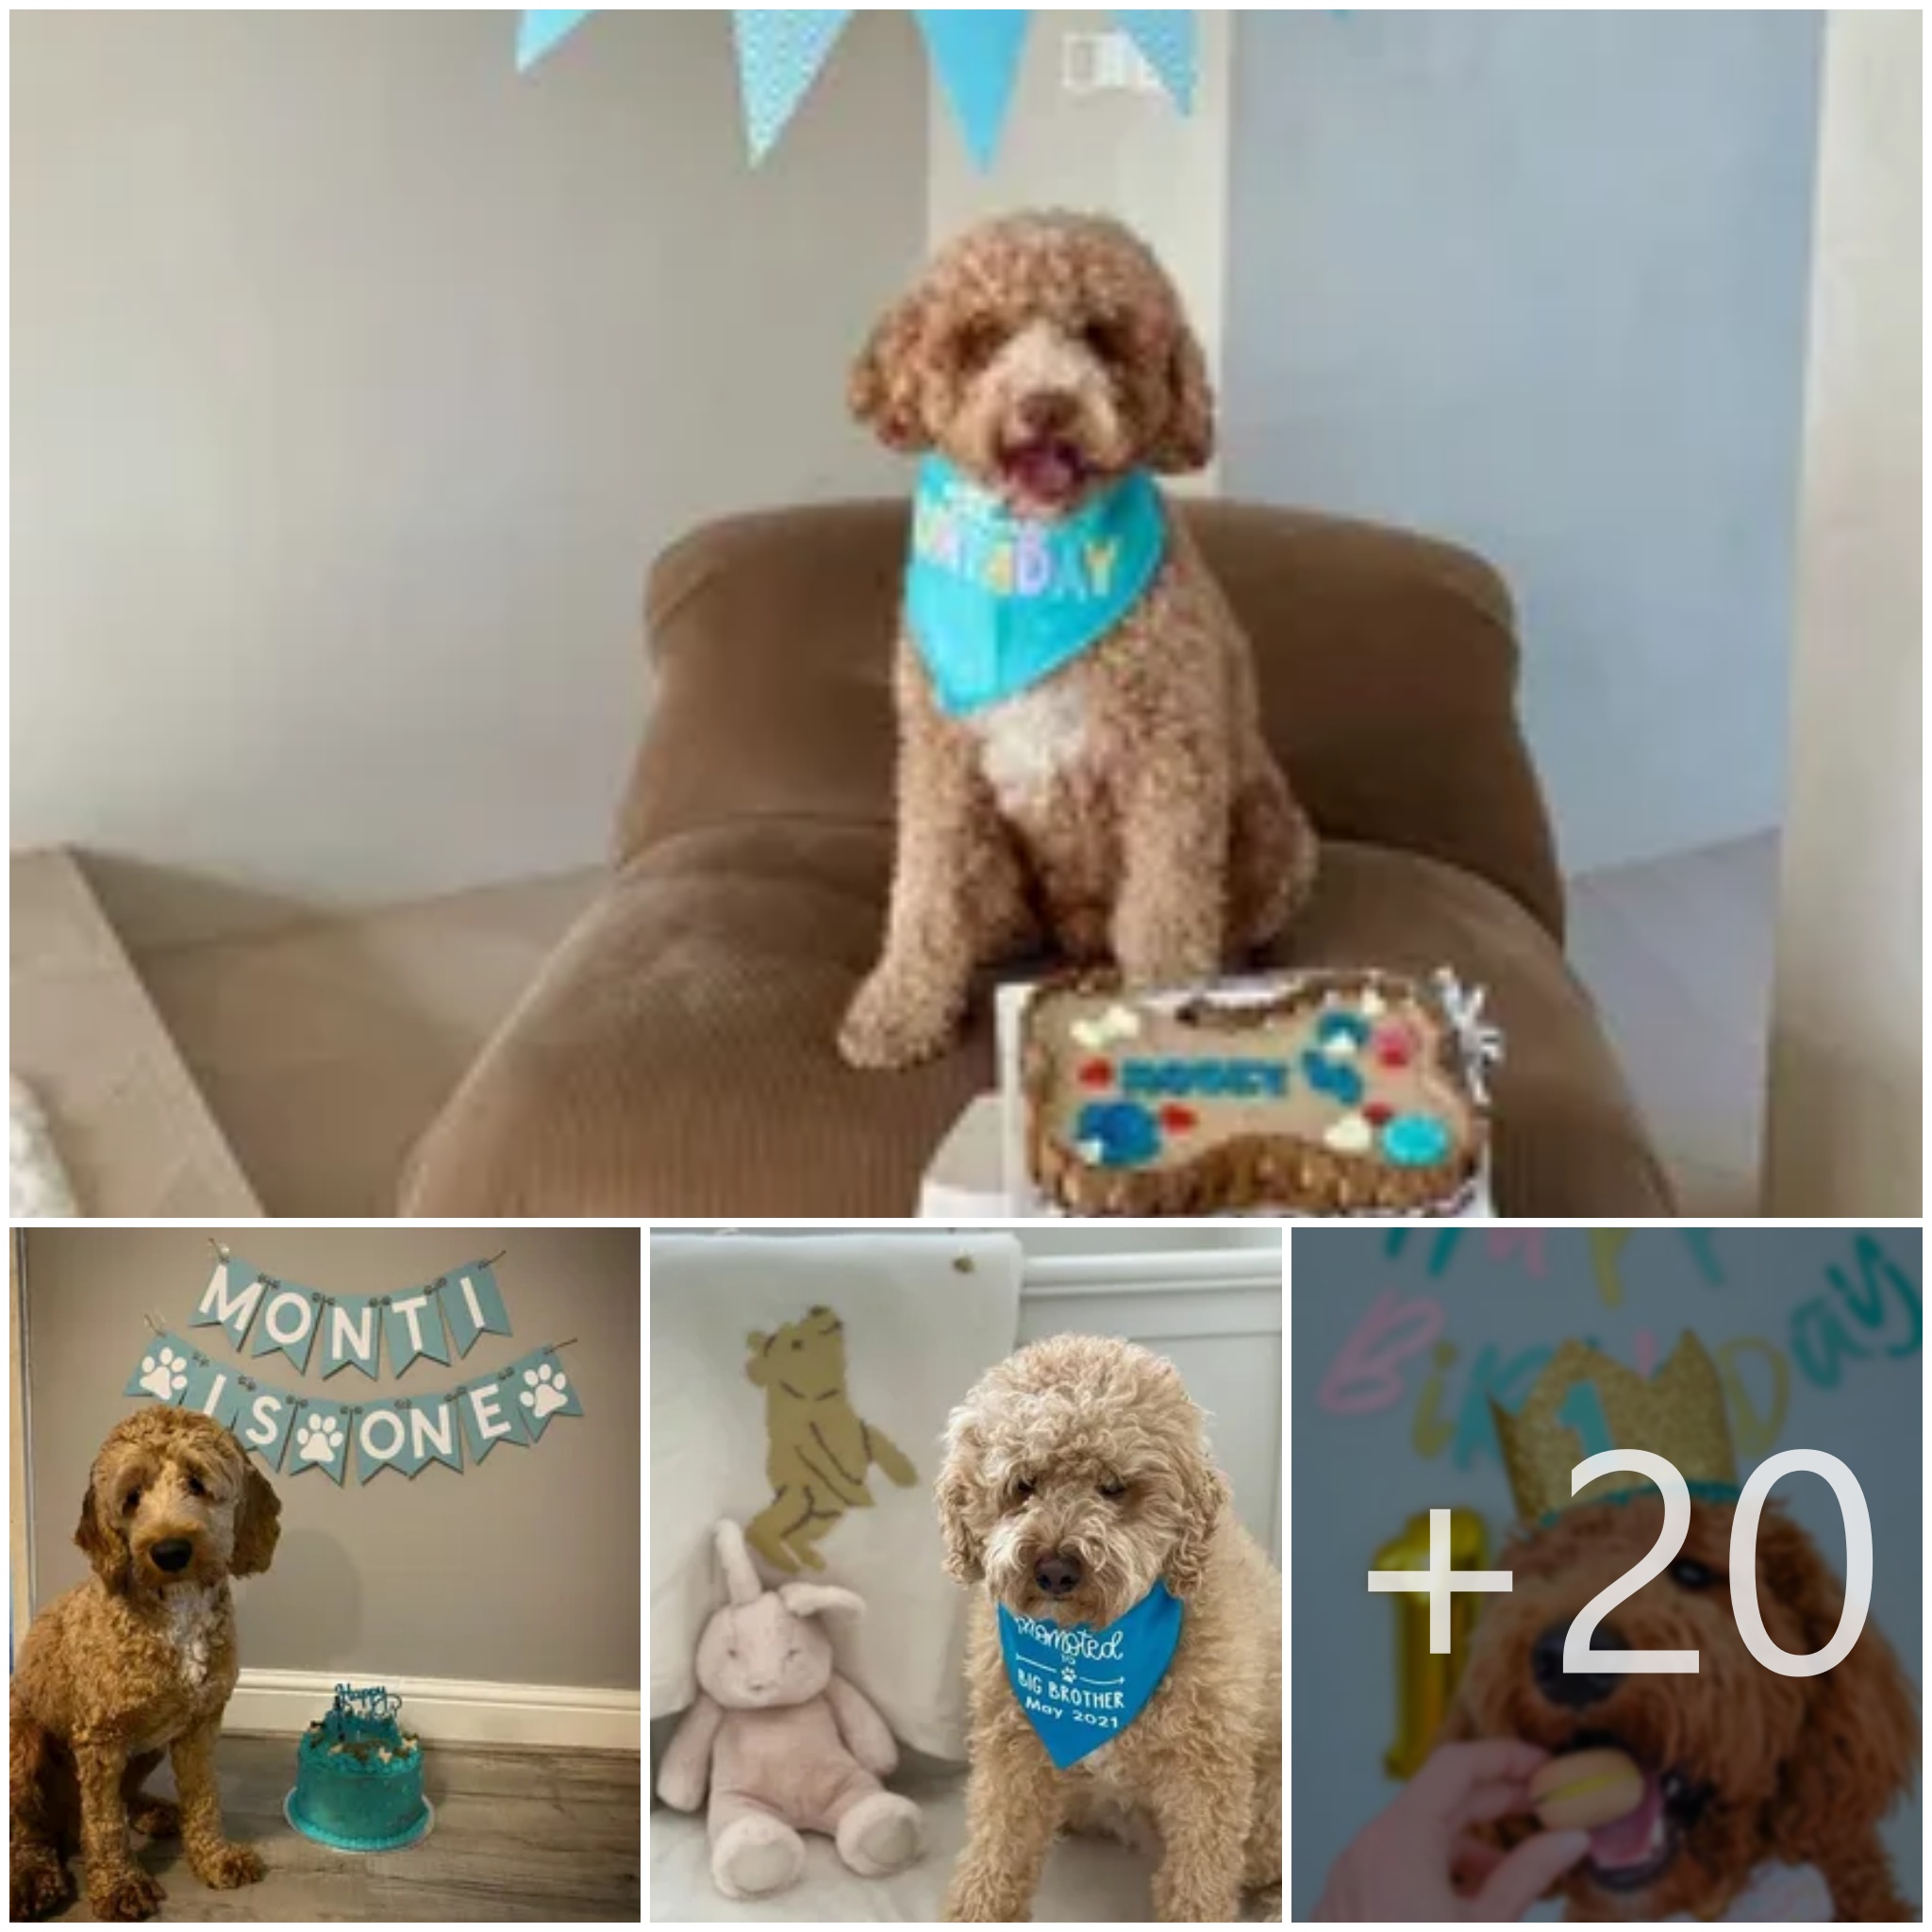 tho “Fetch Fun: How to Organize the Ultimate Dog Birthday Party That Brings Joy to Netizens” tho